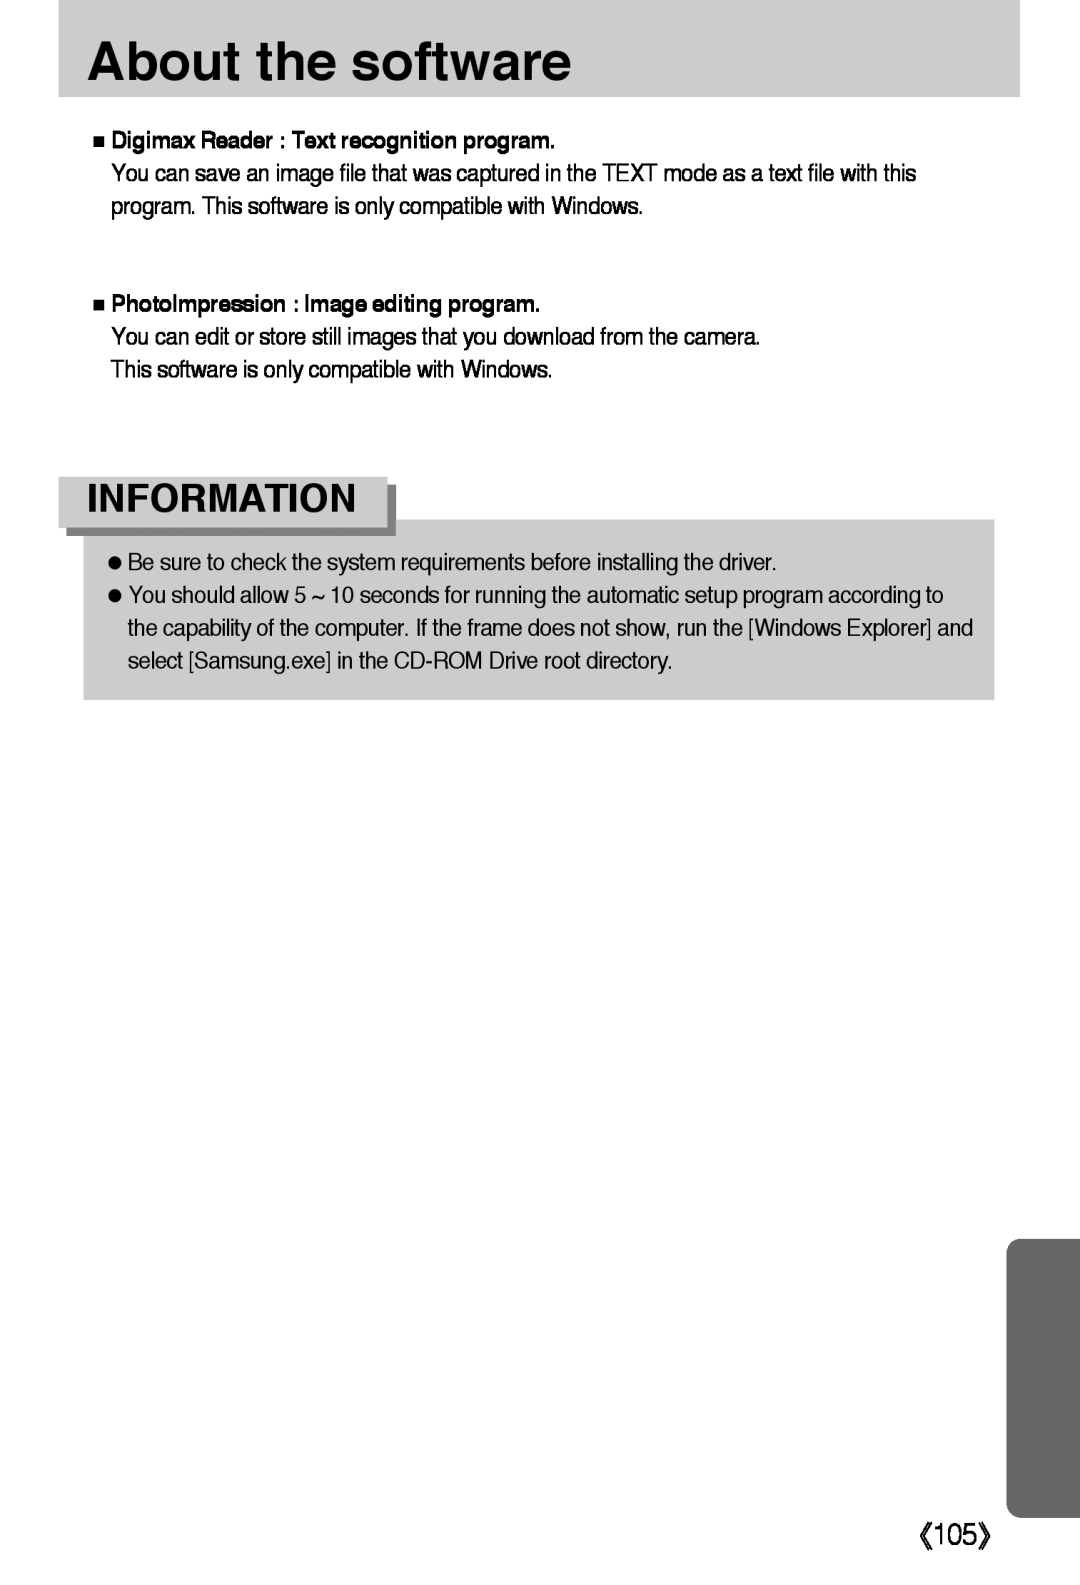 Samsung L50 user manual 《105》, About the software, Information, Digimax Reader Text recognition program 